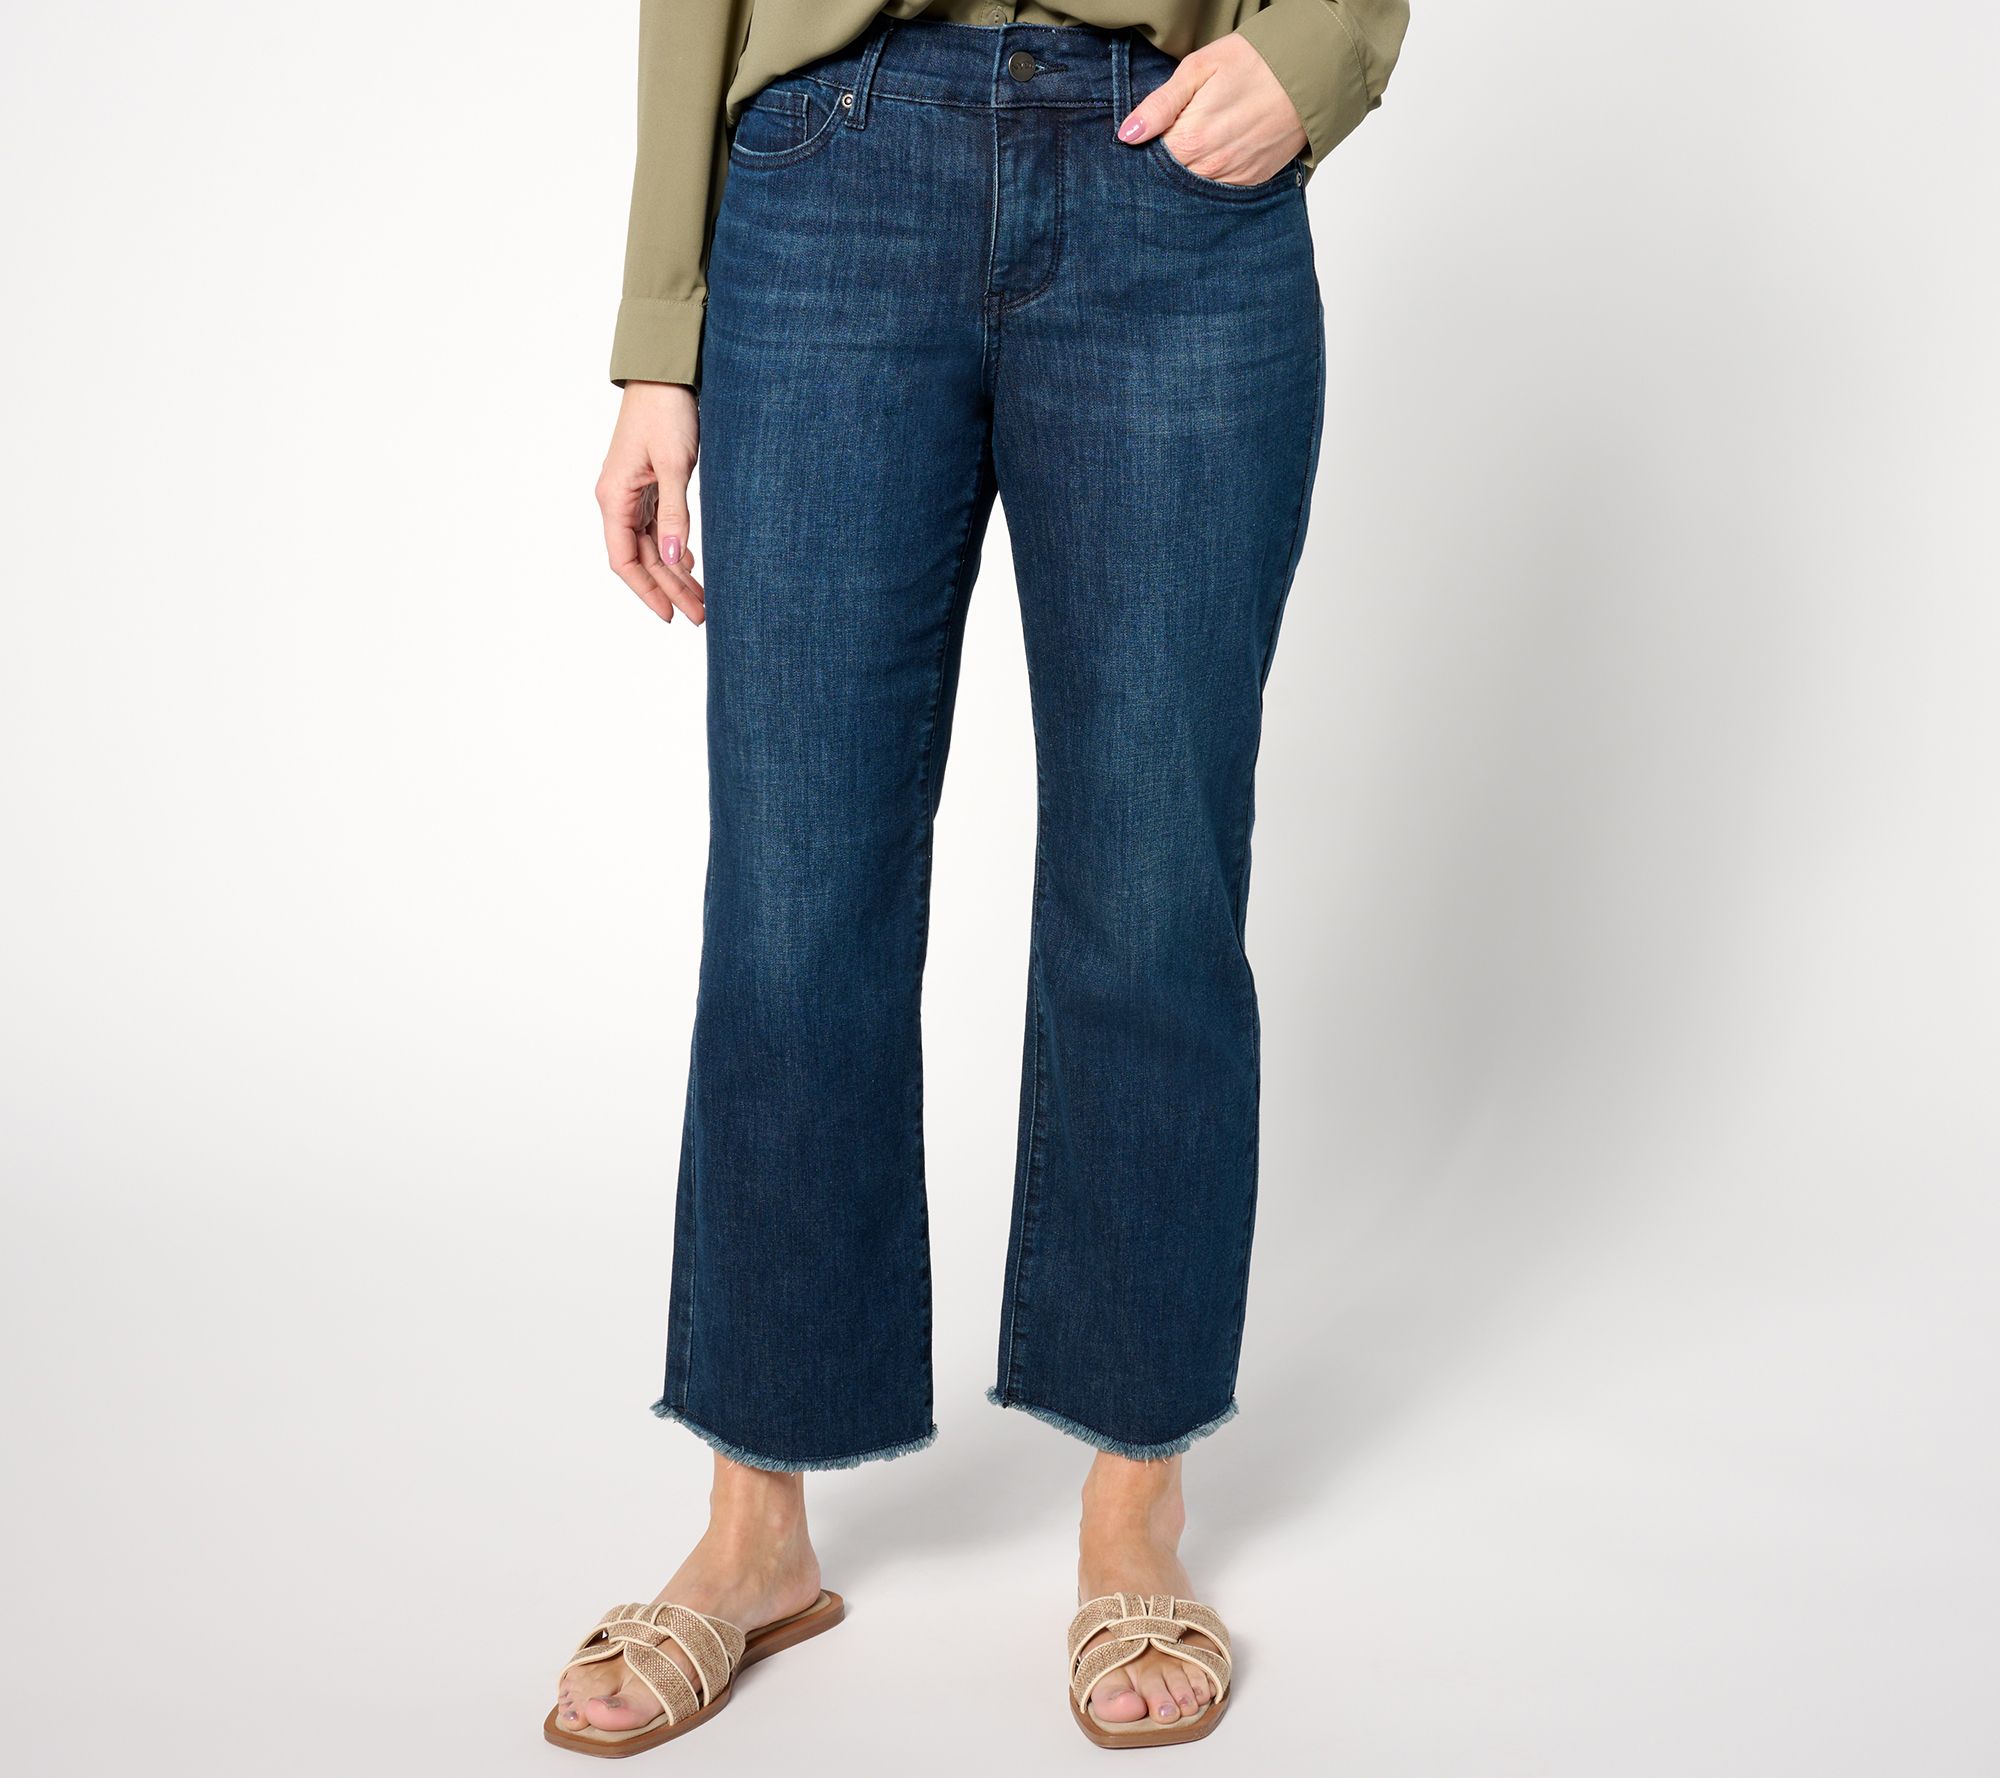 Clothing & Shoes - Bottoms - Pants - Kim & Co. Deluxe Denim Knit Soft Flare  Pant - Online Shopping for Canadians